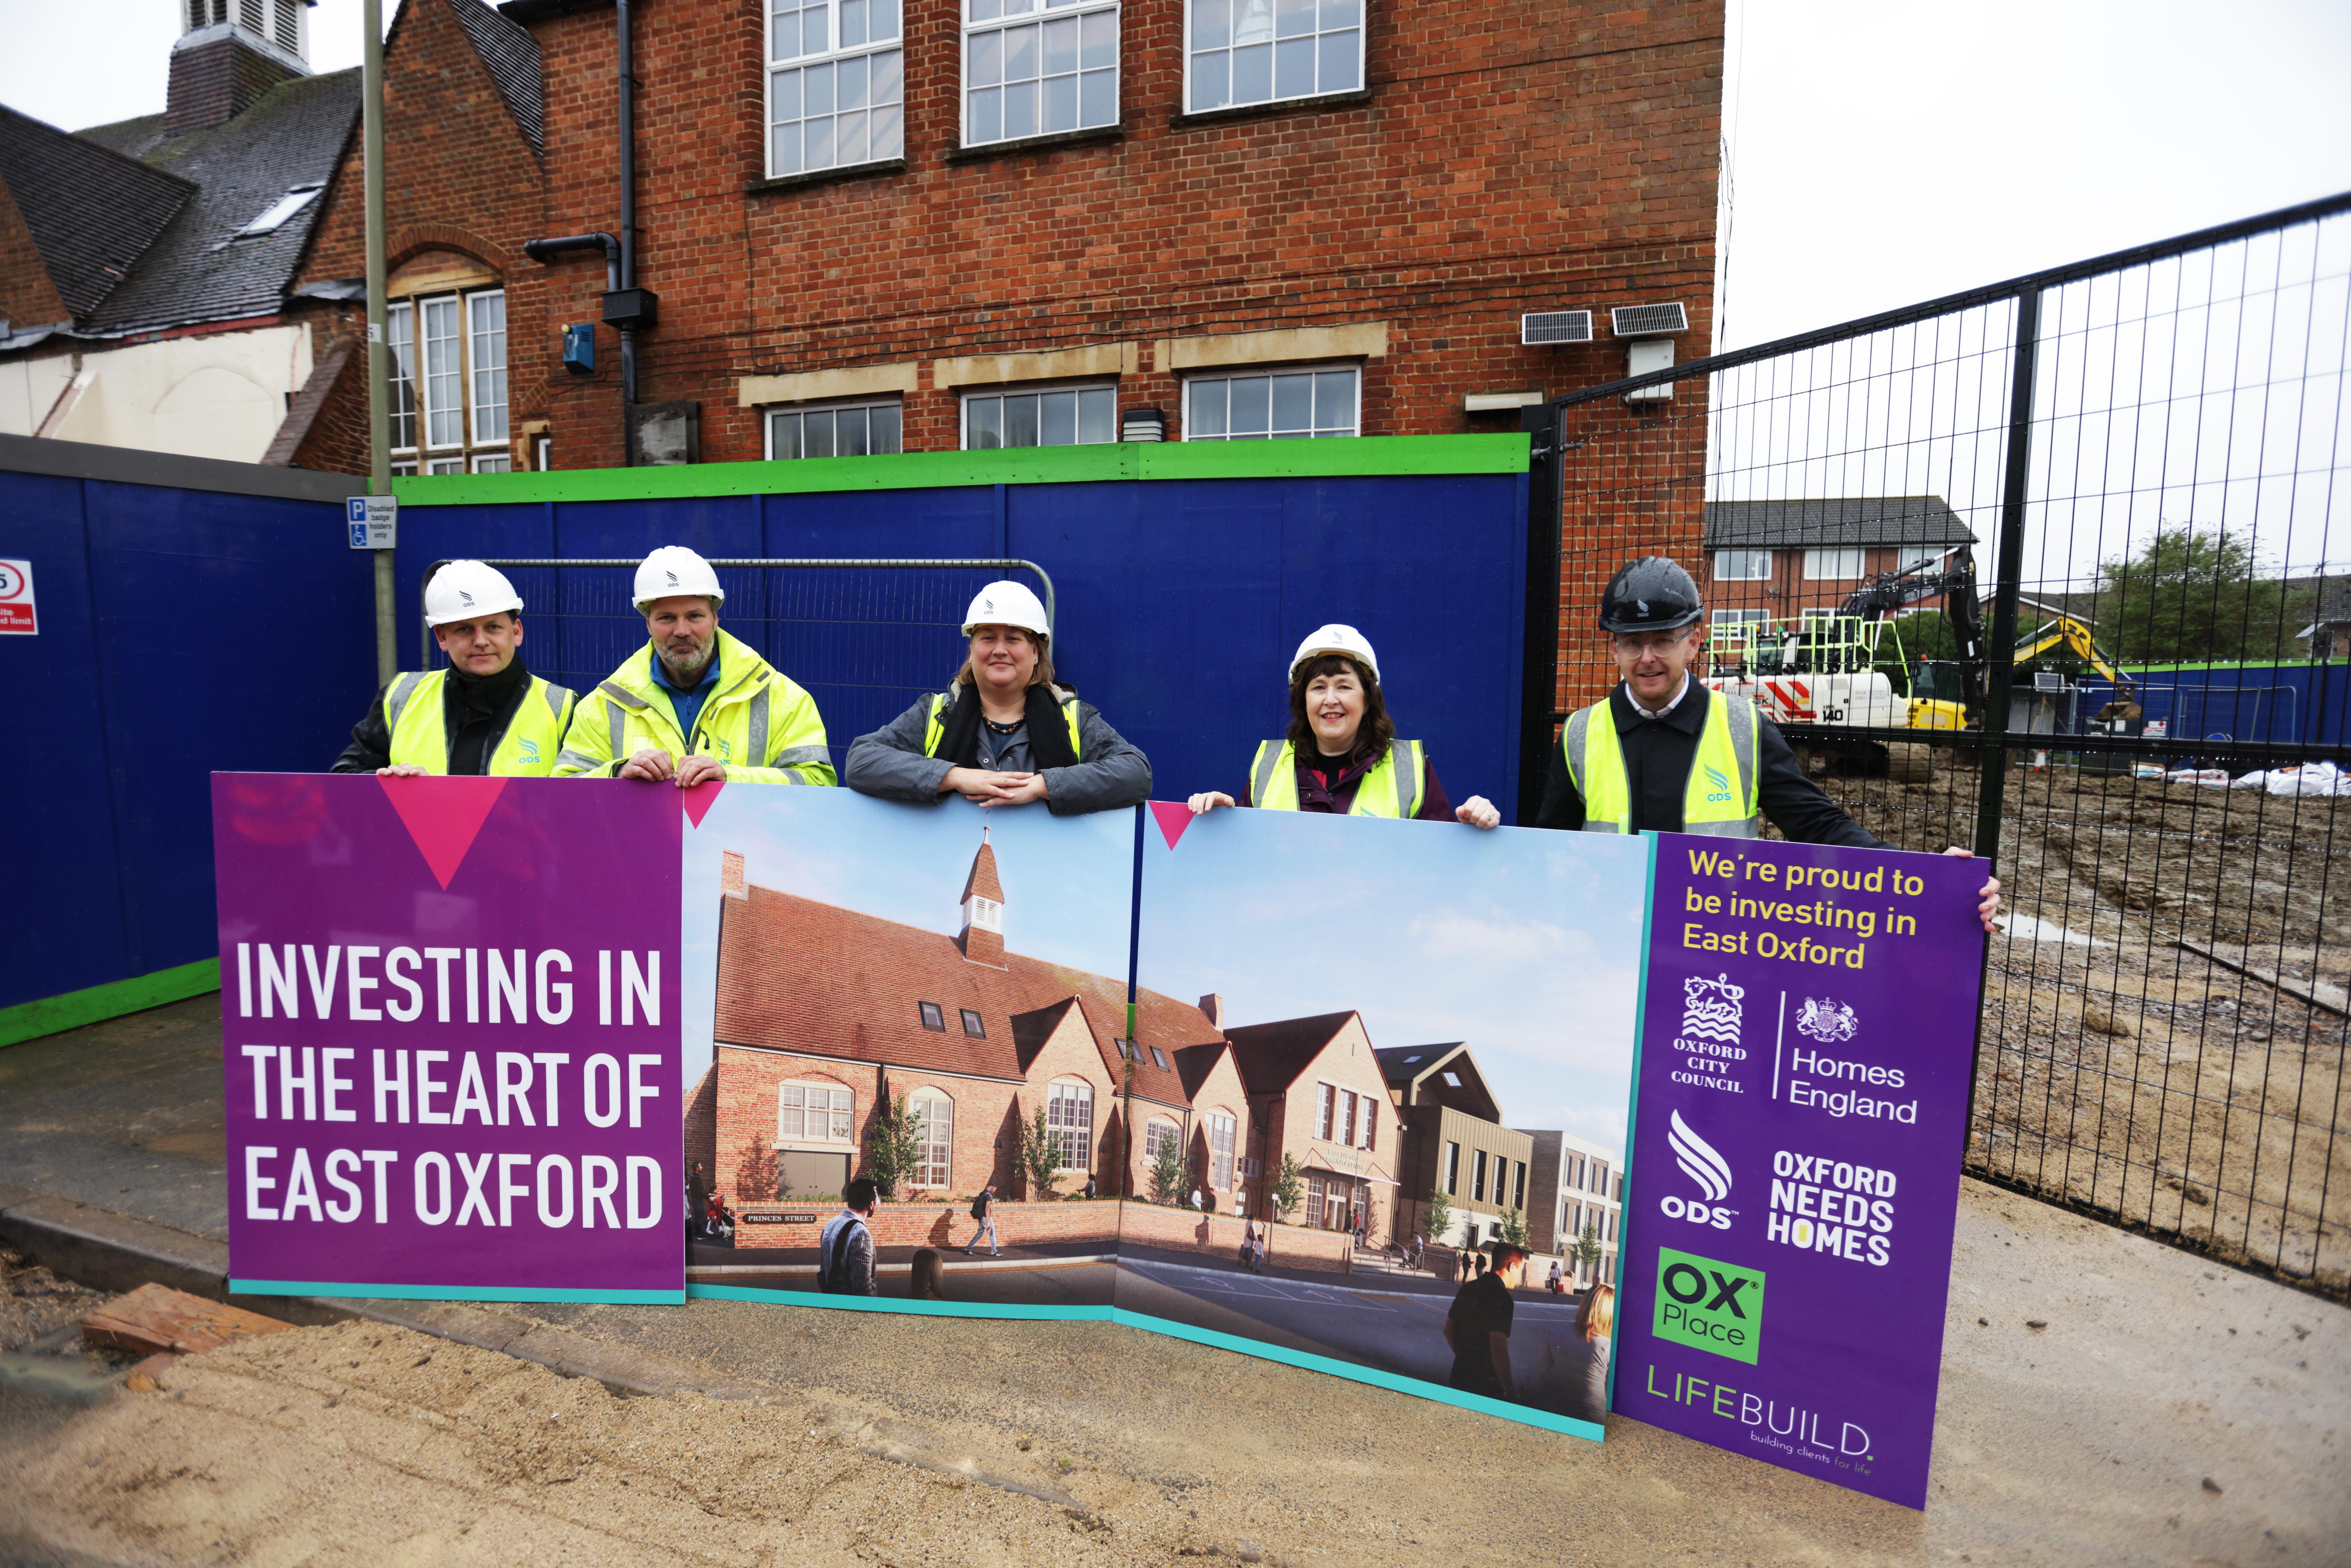 A group of five individuals in his-visibility yellow jackets and white hard hats standing in front of the brick East Oxford Community Centre building. They are holding some large signs which show what the building will look like when work is completed.